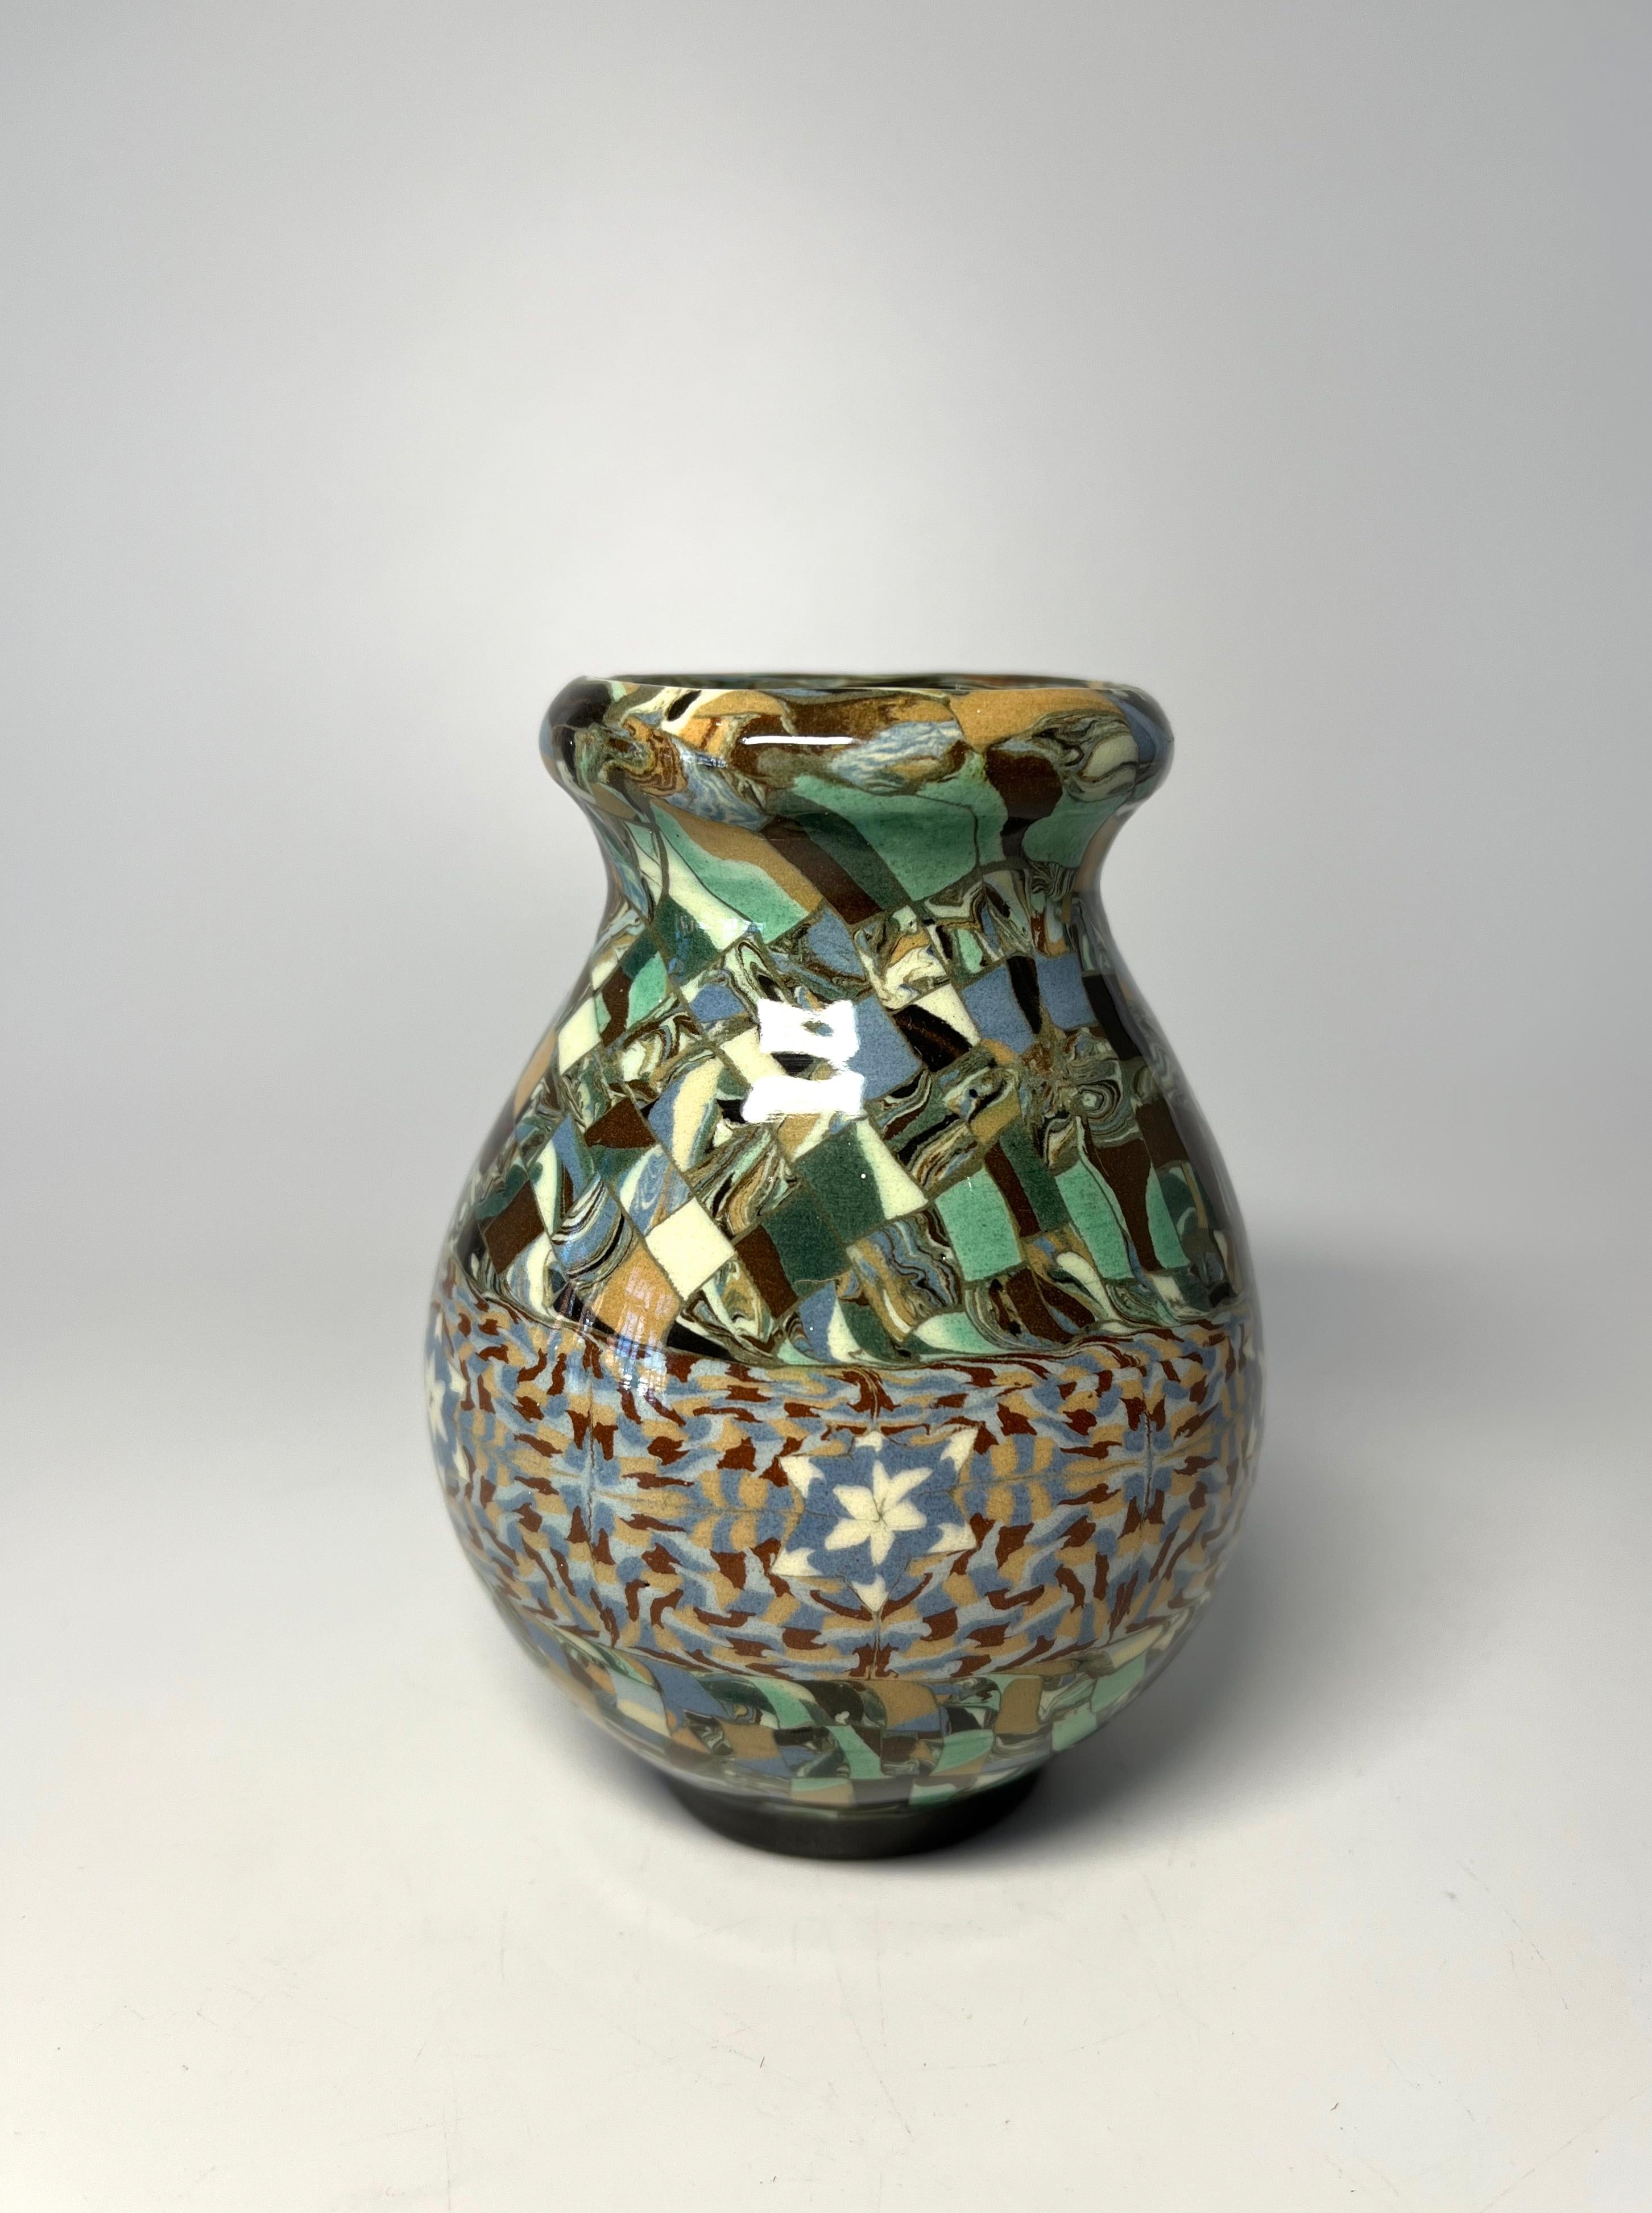 Jean Gerbino for Vallauris, France, ceramic glazed mosaic, shaped vase with snowflake motif
In exceptional original condition
Circa 1960's
Signed Gerbino  to base
Height 4.5 inch, Diameter 3.5 inch, 
In excellent condition. 
Wear consistent with age